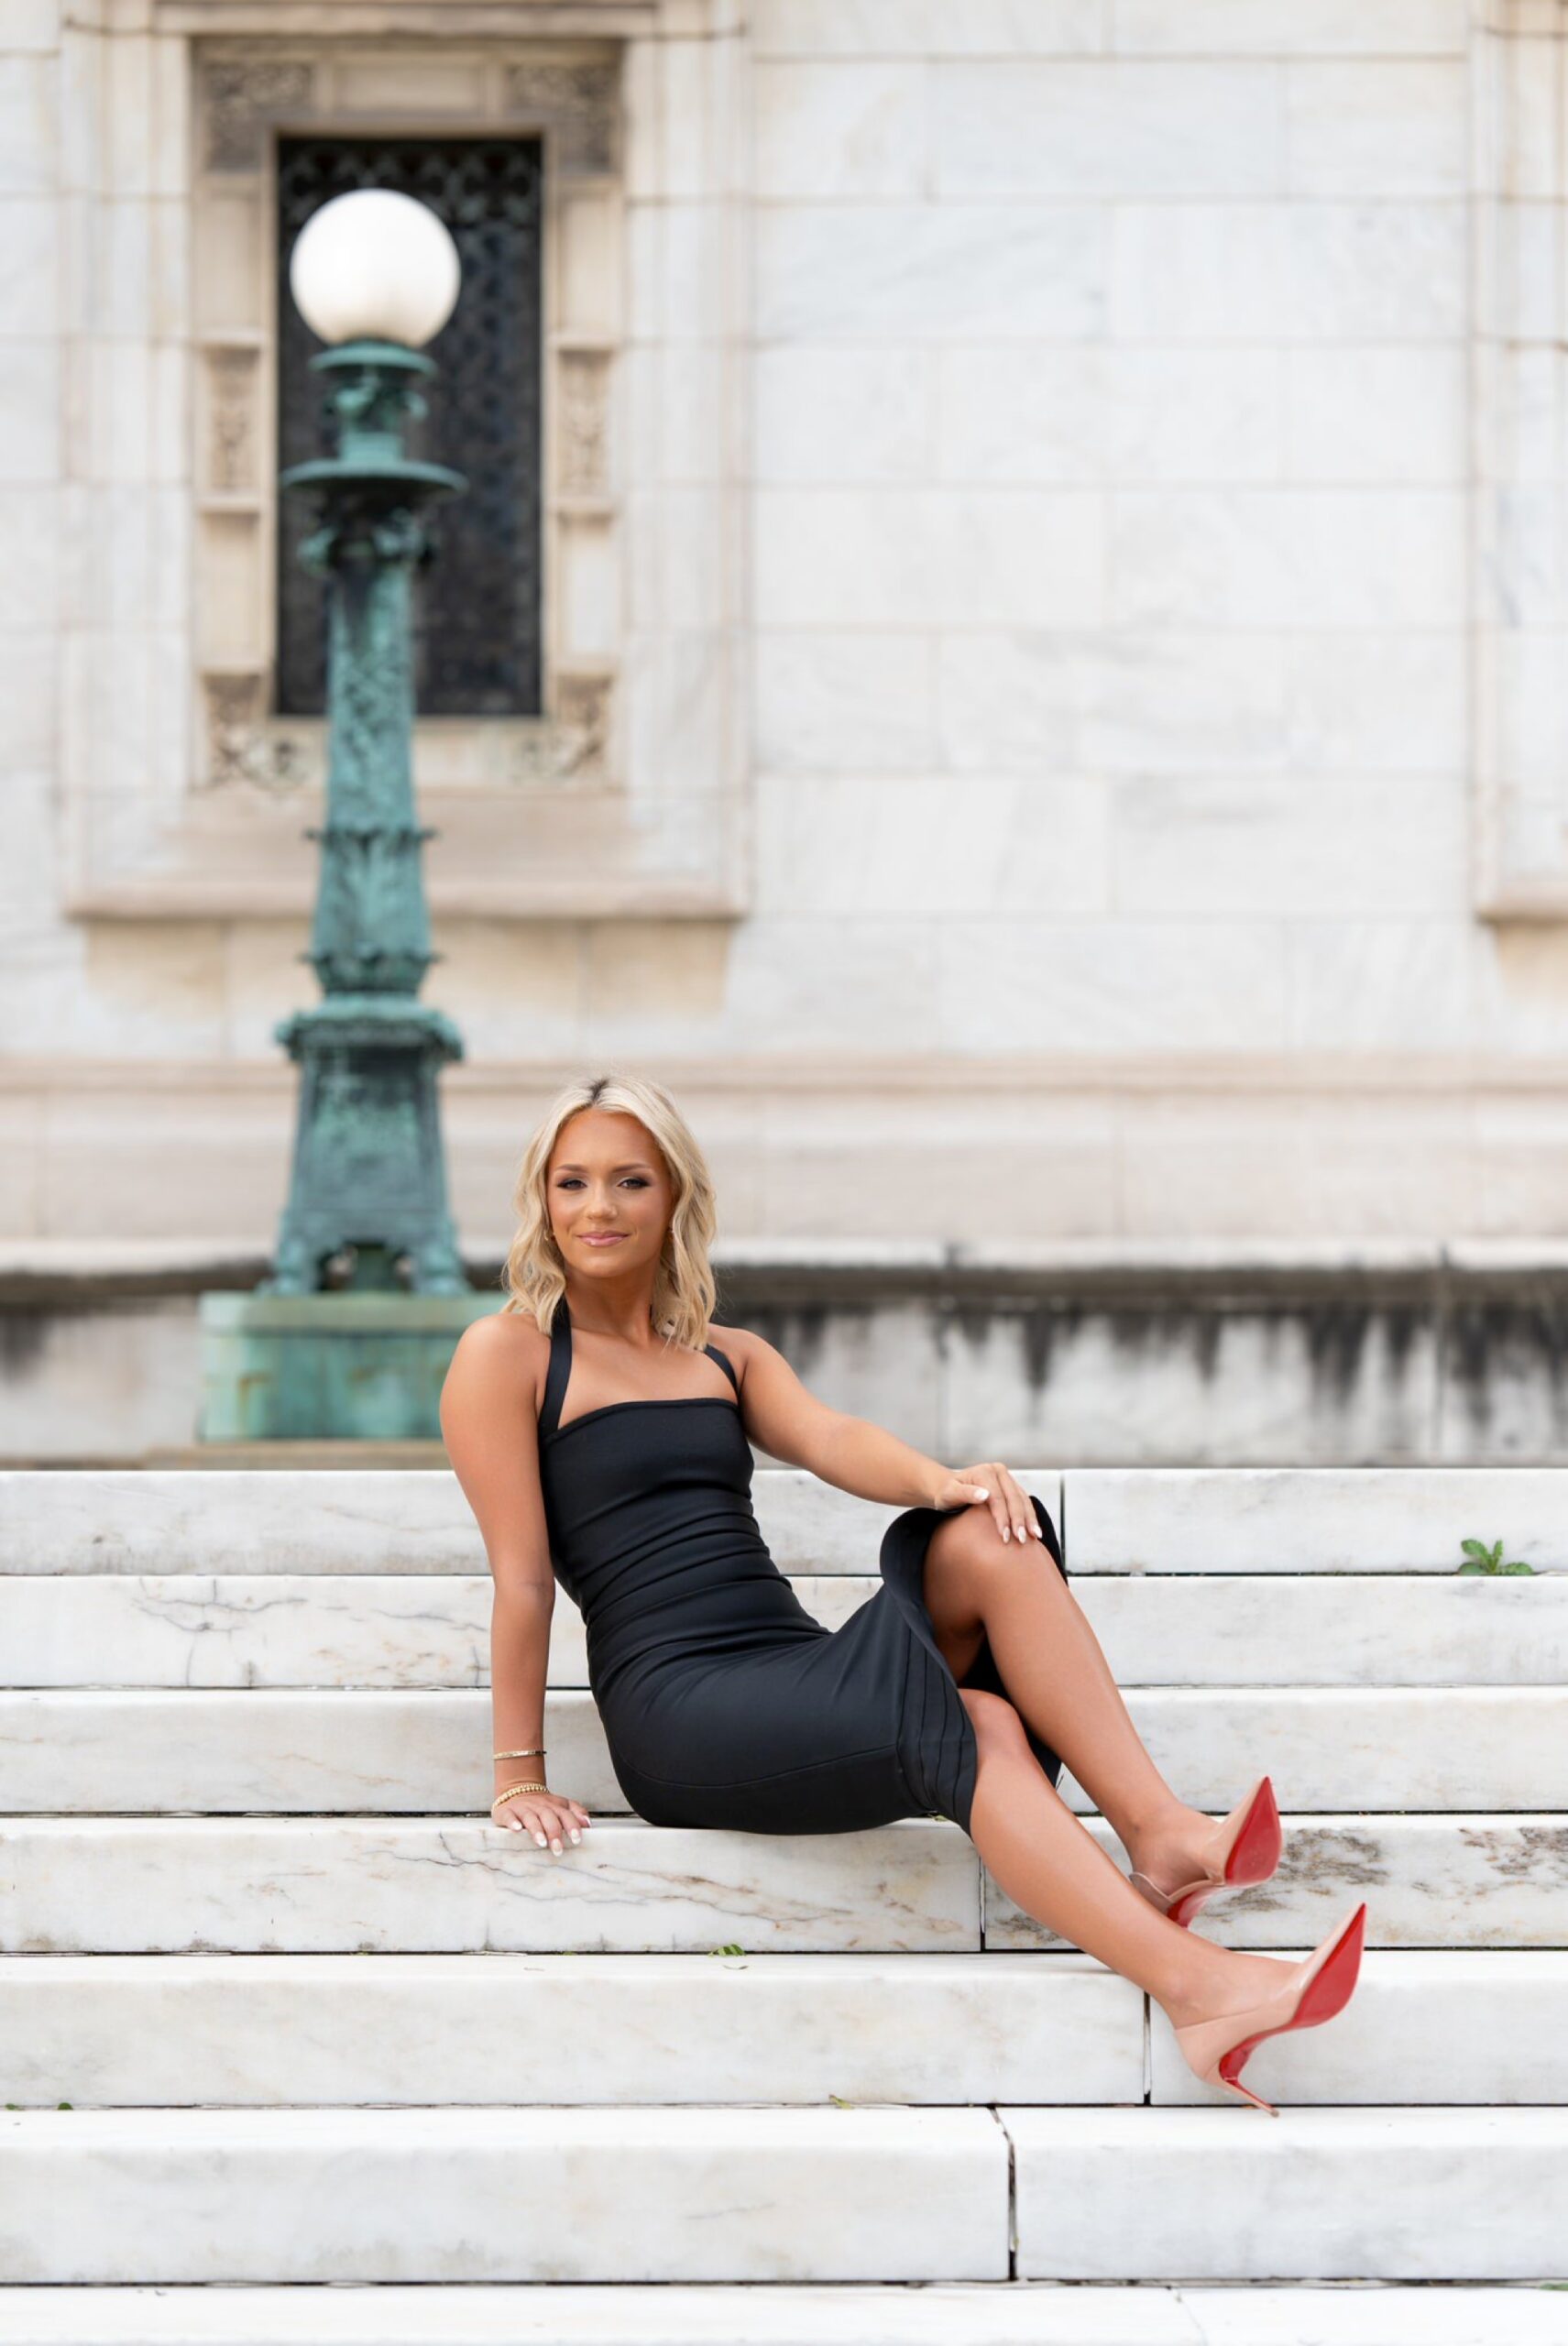 A female high school senior wearing a black dress and Christian Louboutin heels poses for her Detroit senior photos at the Detroit Public Library.